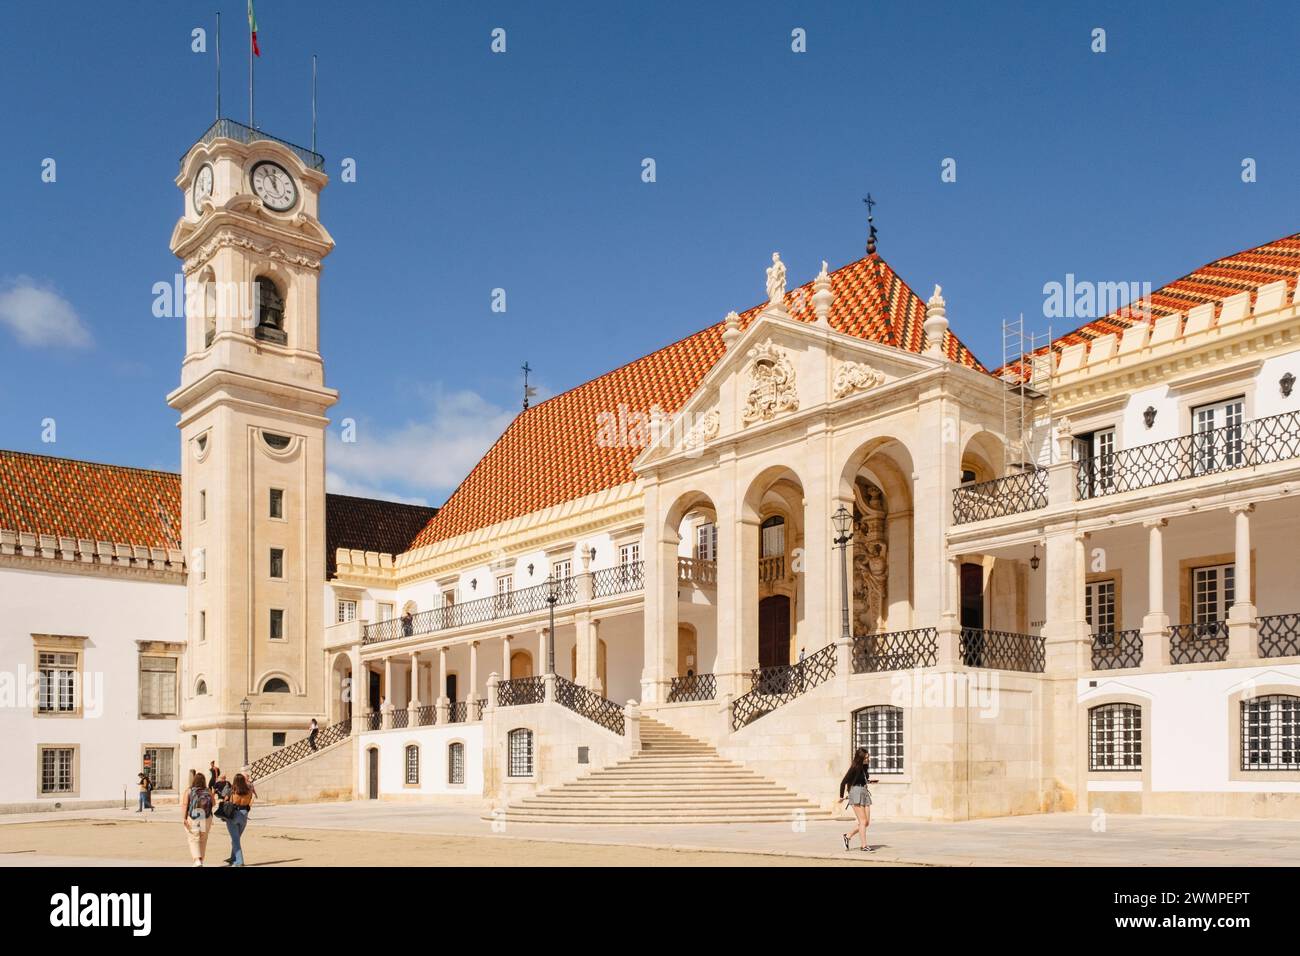 University of Coimbra courtyard and clock tower. Coimbra, Portugal, Europe. A UNESCO world heritage site Stock Photo